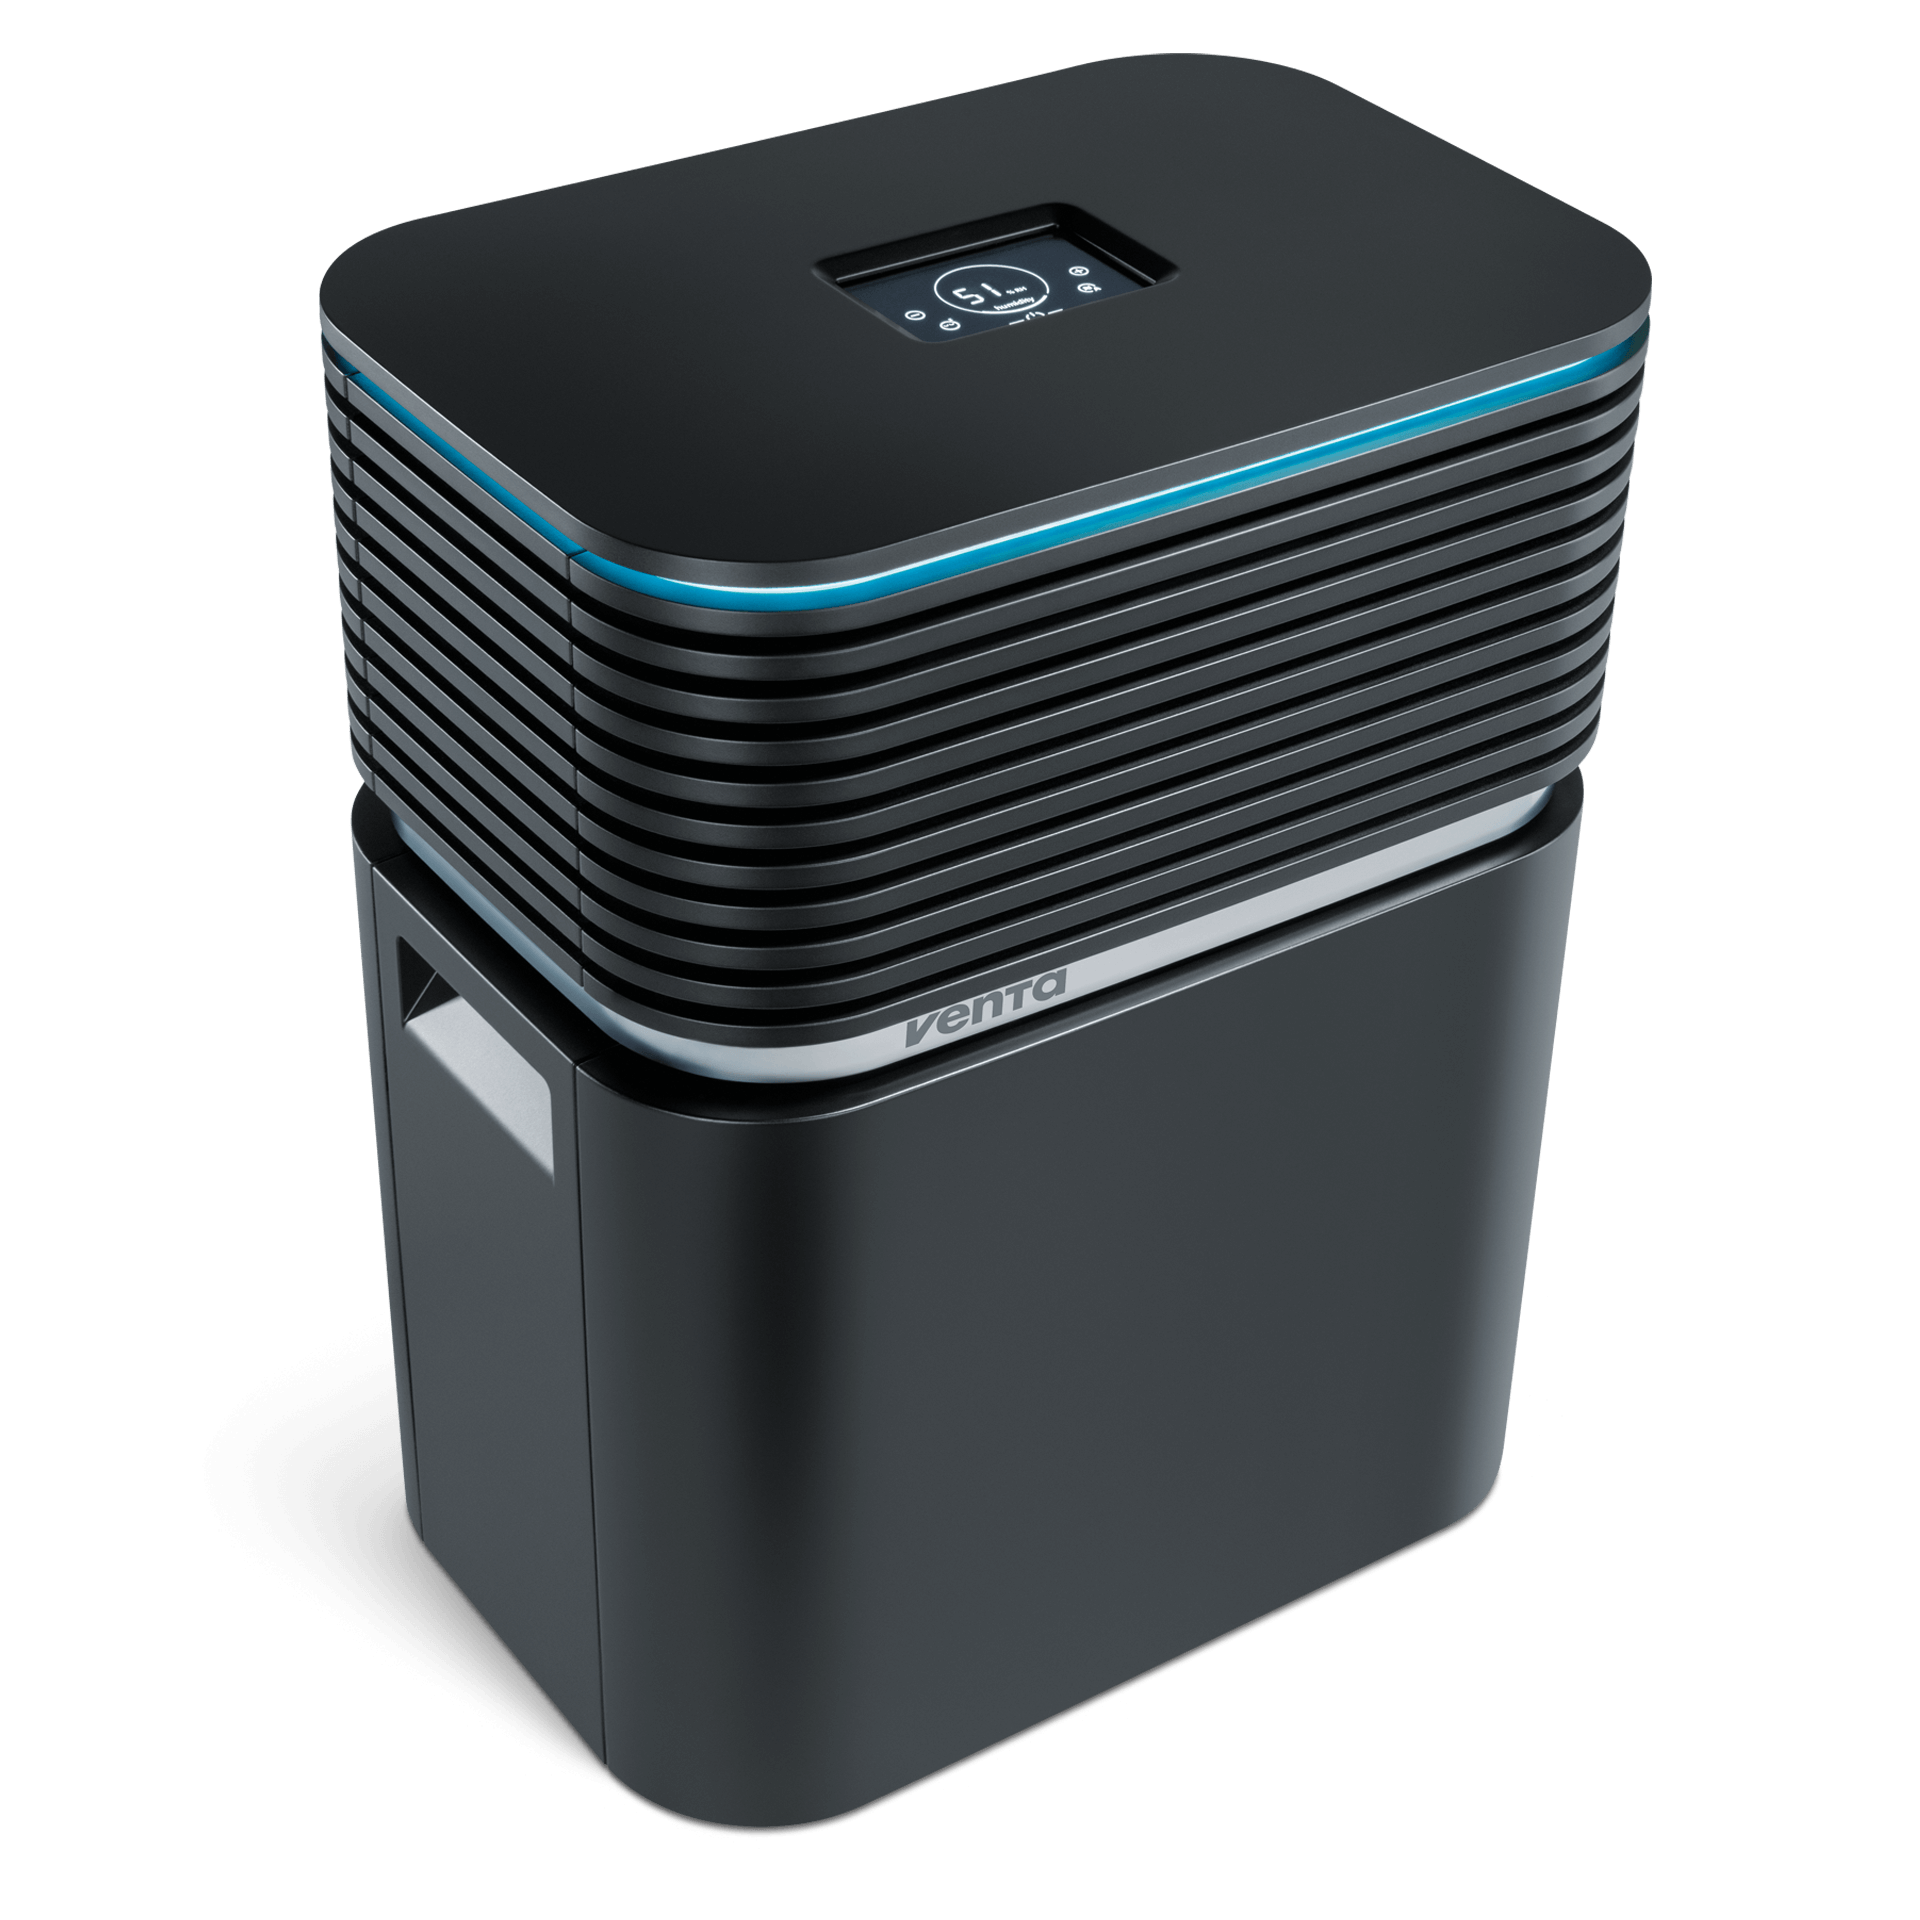 Copy of Venta LW15 Airwasher Air cleaner and humidifier 2 in 1 anthracite 20m2